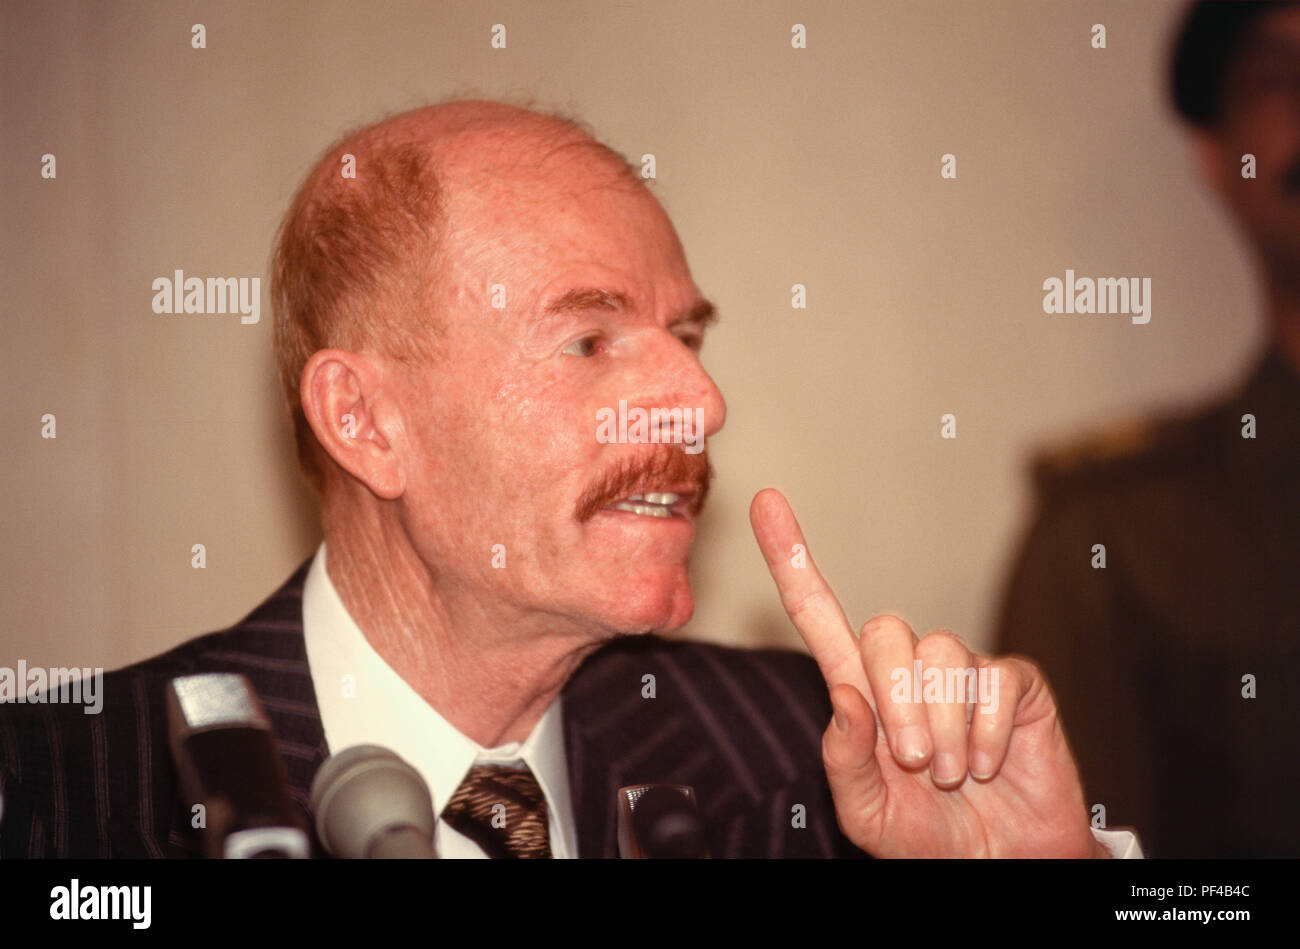 Baghdad, Iraq - 16 October 1995 - Izzat Ibrahim al-Douri, Iraqi statesman and Vice Chairman of the Iraqi Revolutionary Command Council and head of the elections committee for the Presidential Referendum on 15 Ocotober 1995, announces the results to the press, where President Saddam Hussein won 99.96% of the vote.    The only question on the paper ballot of the referendum was "Do you approve of President Saddam Hussein being President of the Republic? Iraqi's find it harder to maintain a decent standard of living due to the strict UN sanctions imposed during the 1990s because of Iraq's invasion Stock Photo